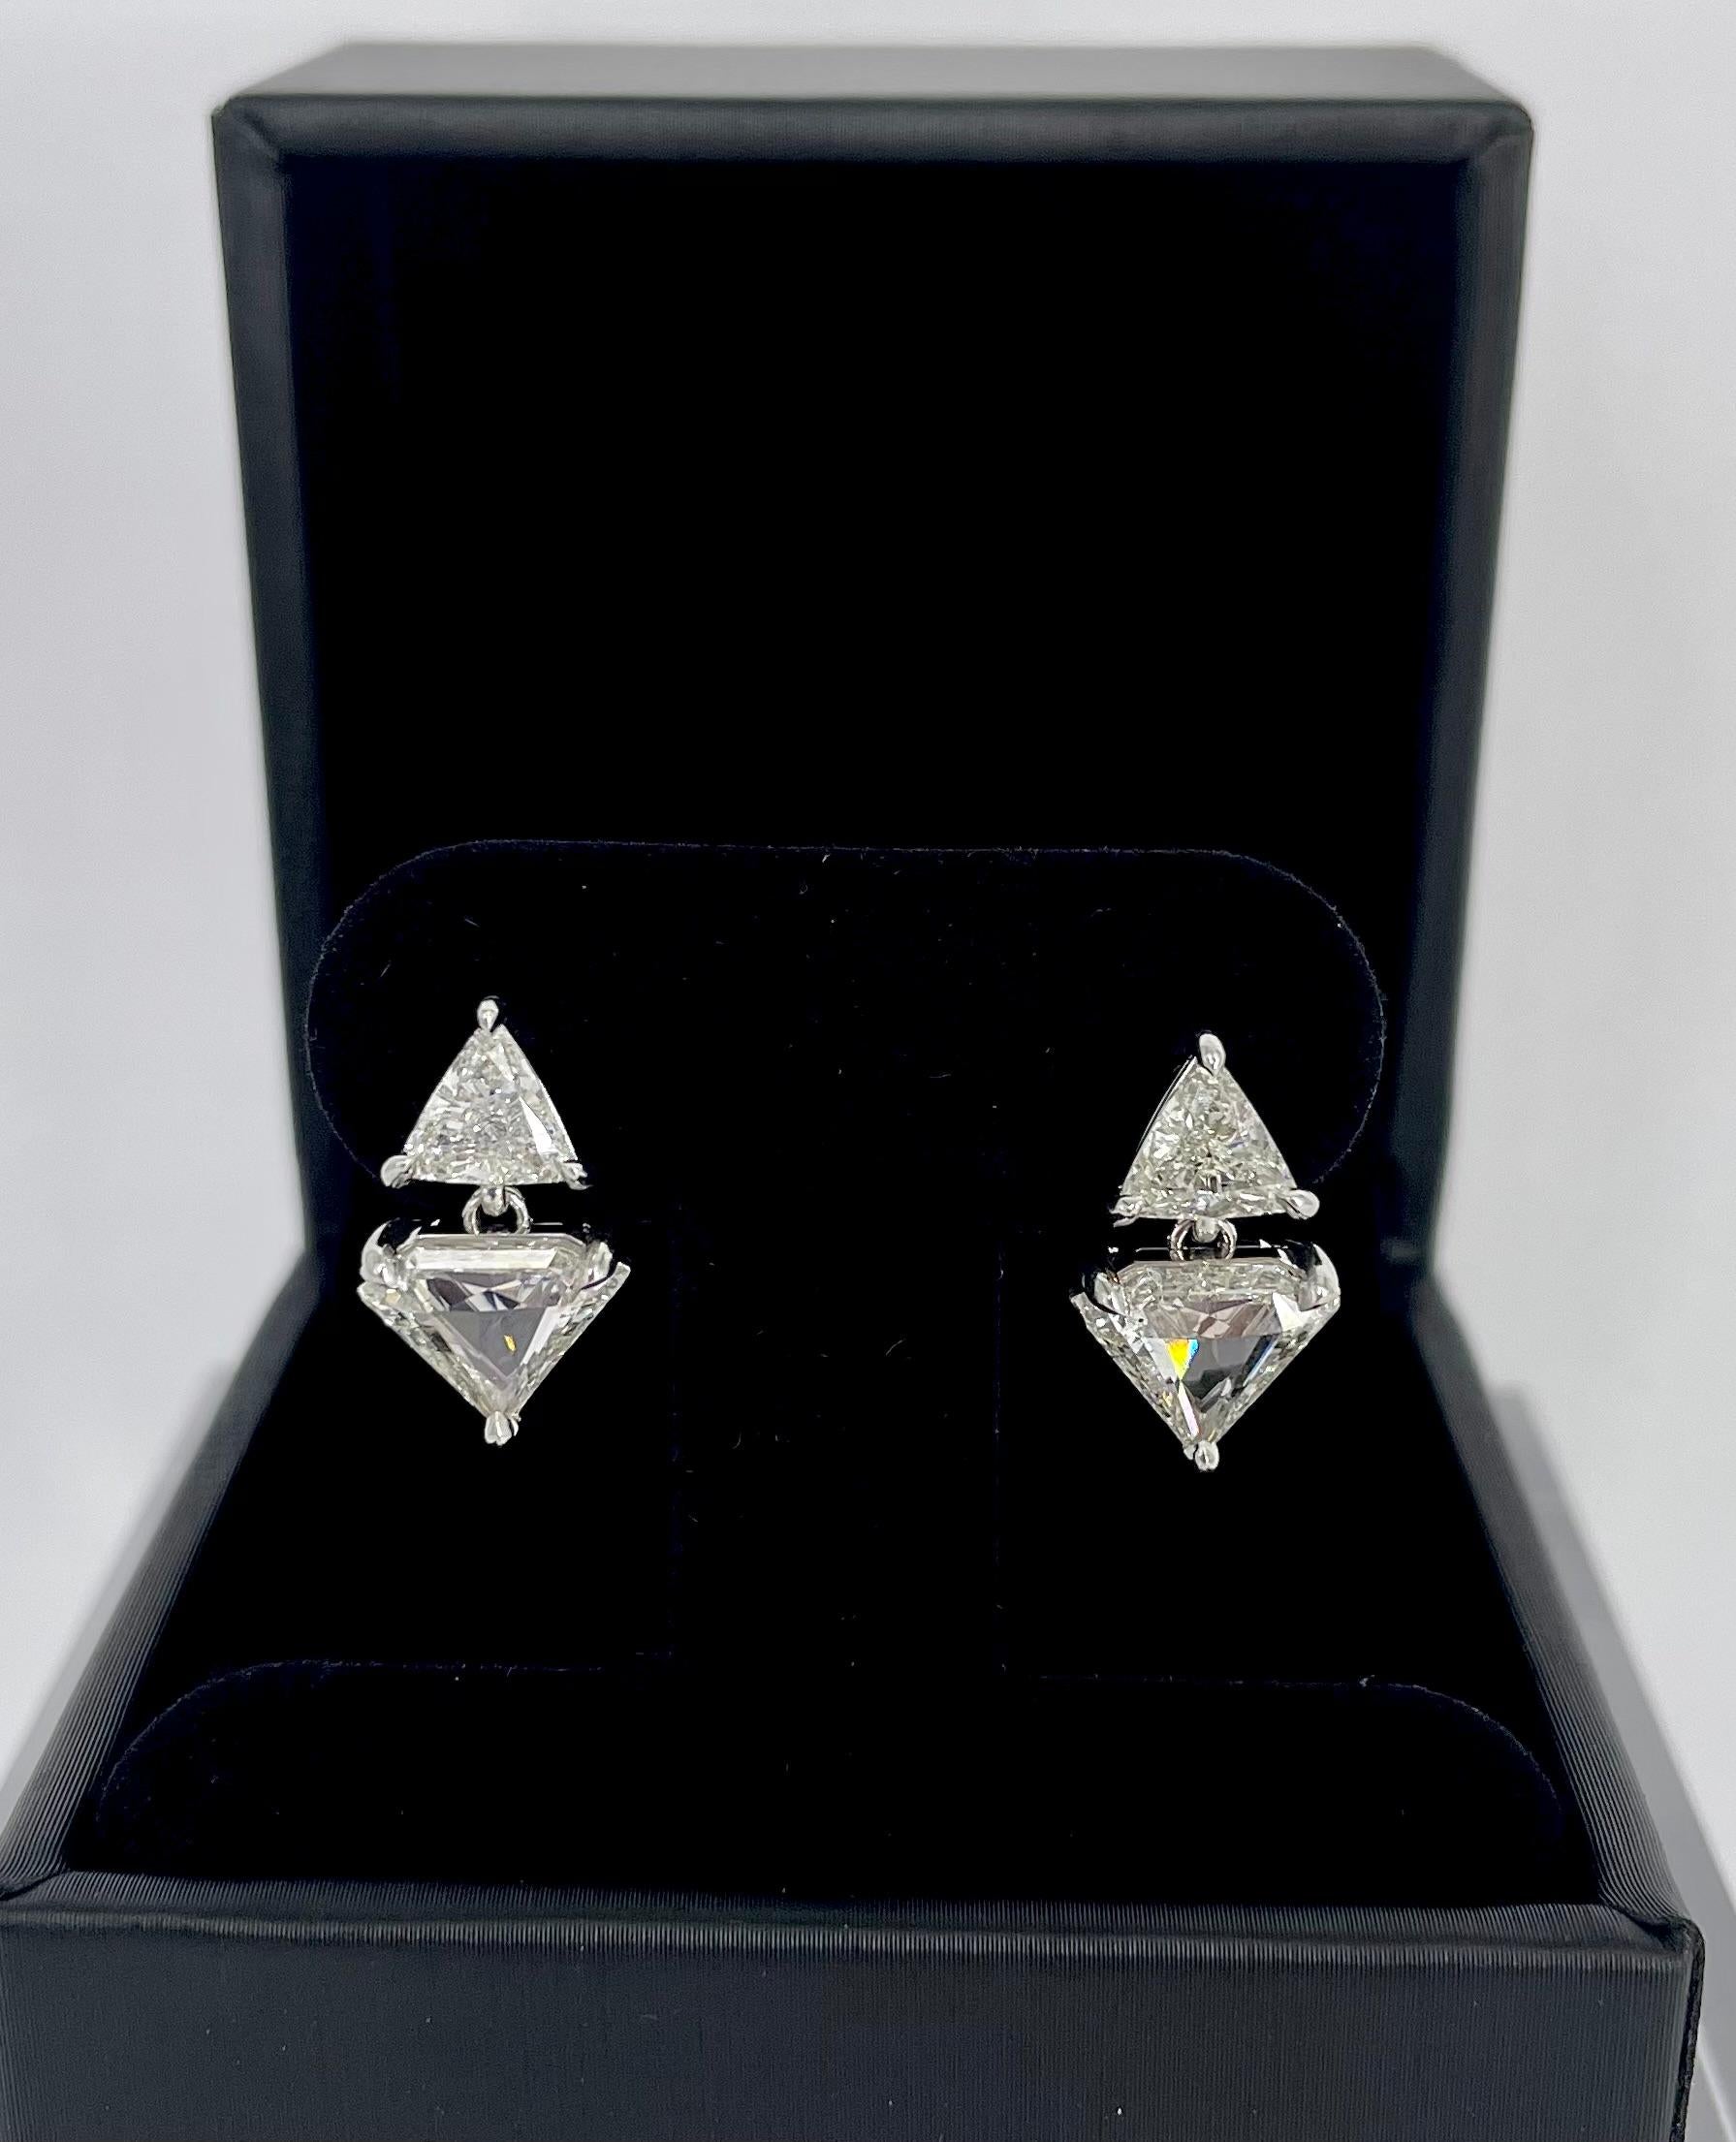 Edgy or elegant, there are so many ways to style this unique pair of diamond drop earrings. The earrings feature trillion cuts set in the stud, and a diamond shape drops just below the ear. Trillions are a sparkly, brilliant cut triangle shape, and